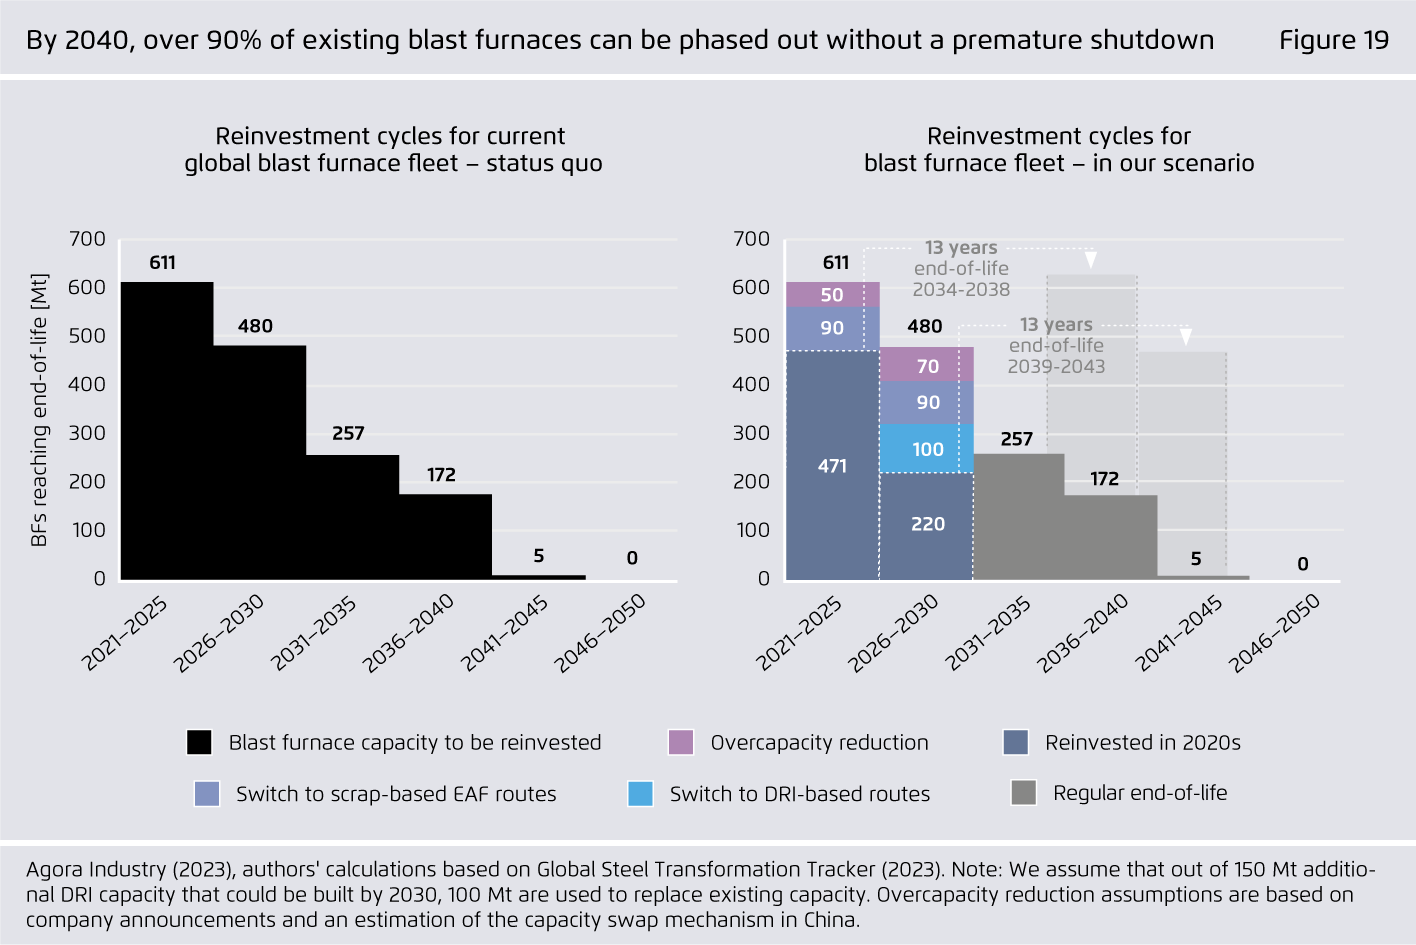 Preview for By 2040, over 90% of existing blast furnaces can be phased out without a premature shutdown